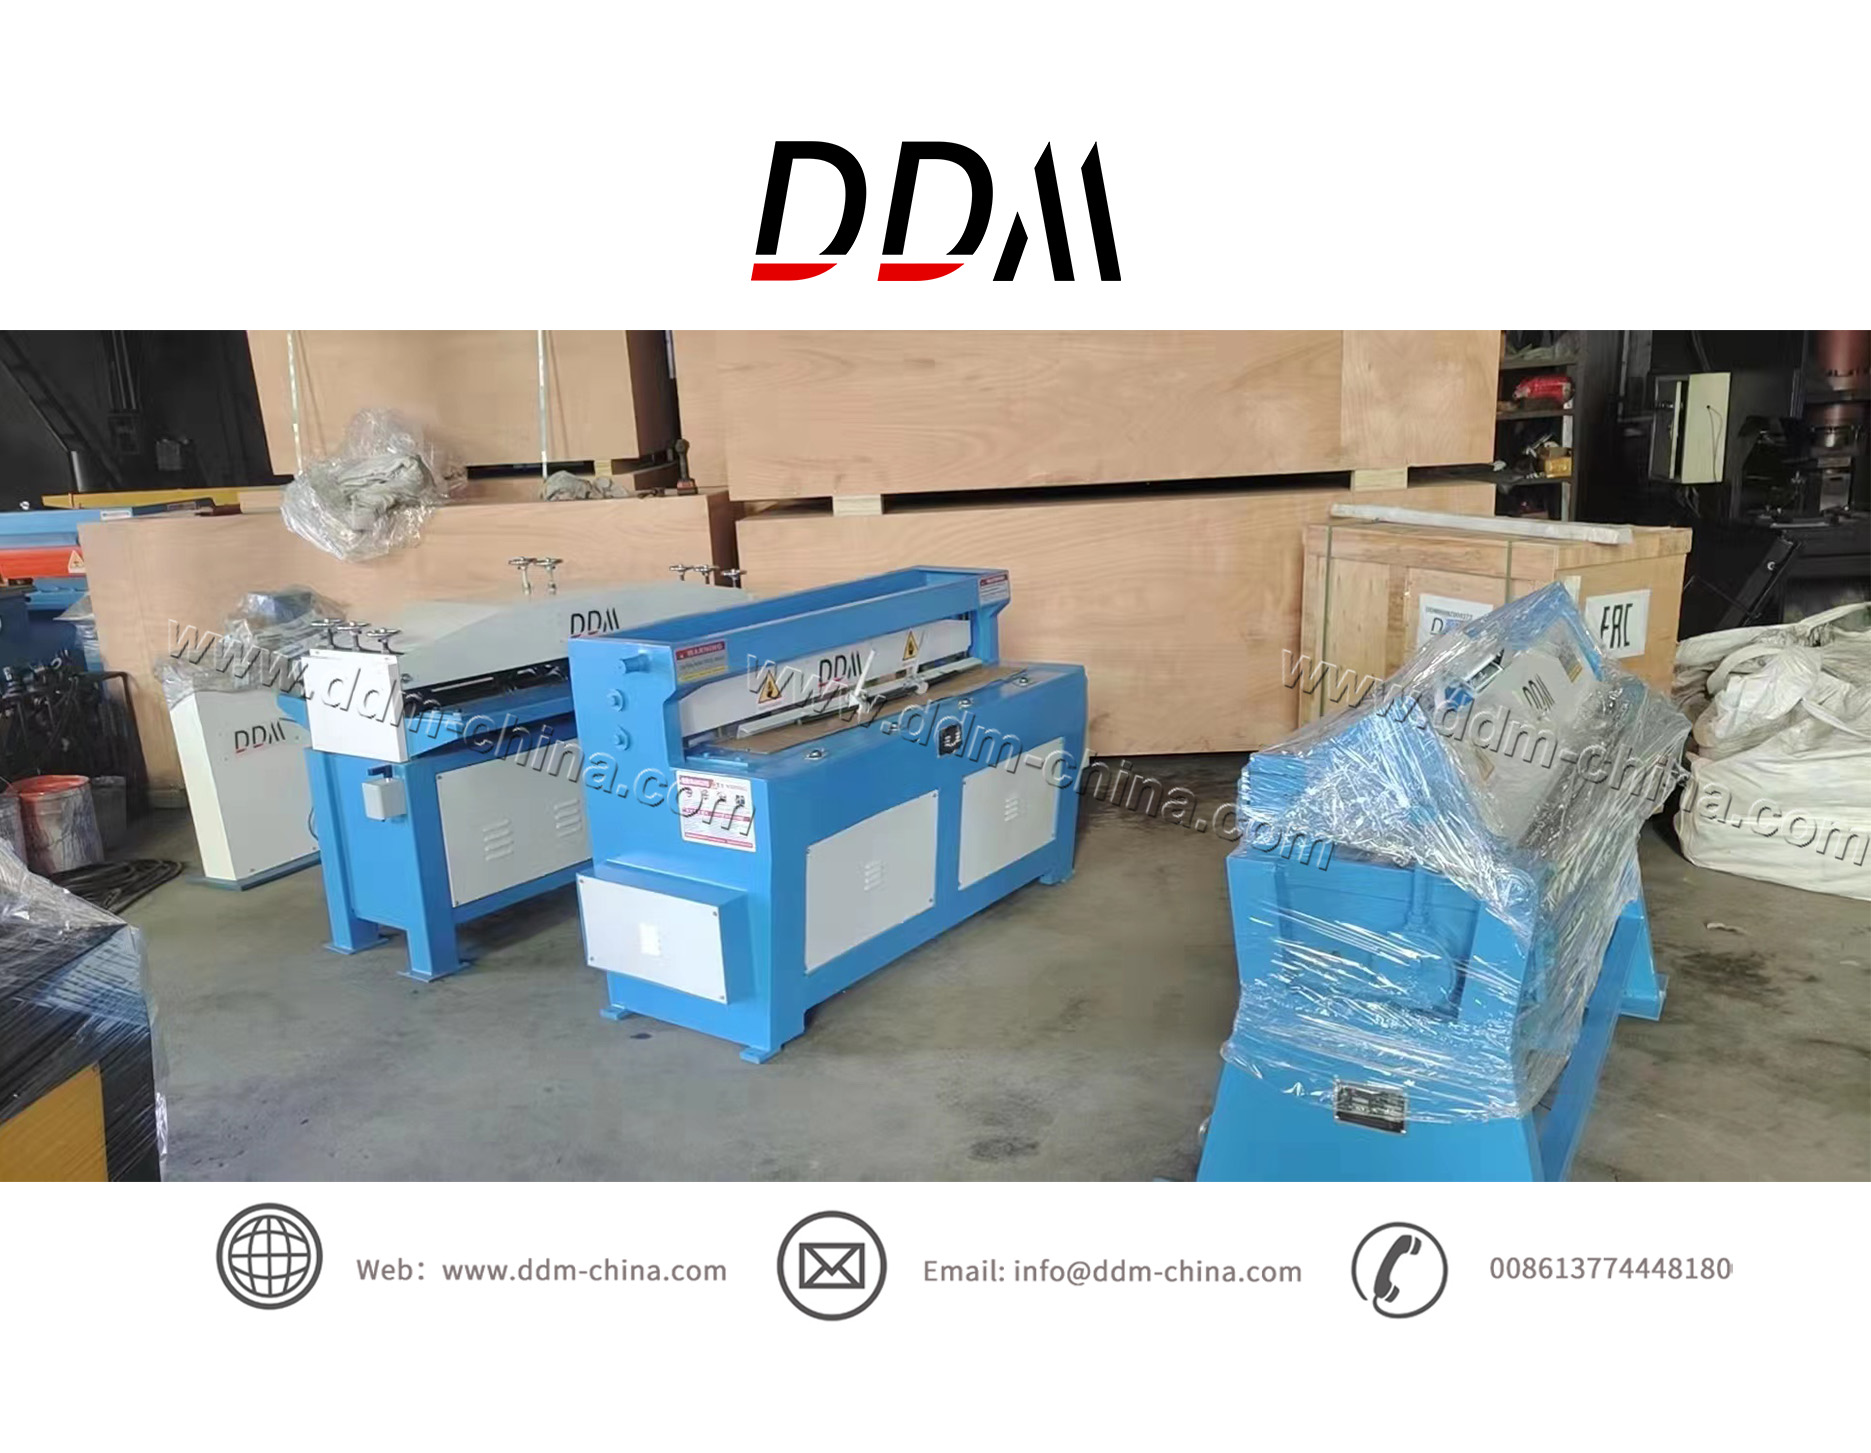 Air duct machine from DDM